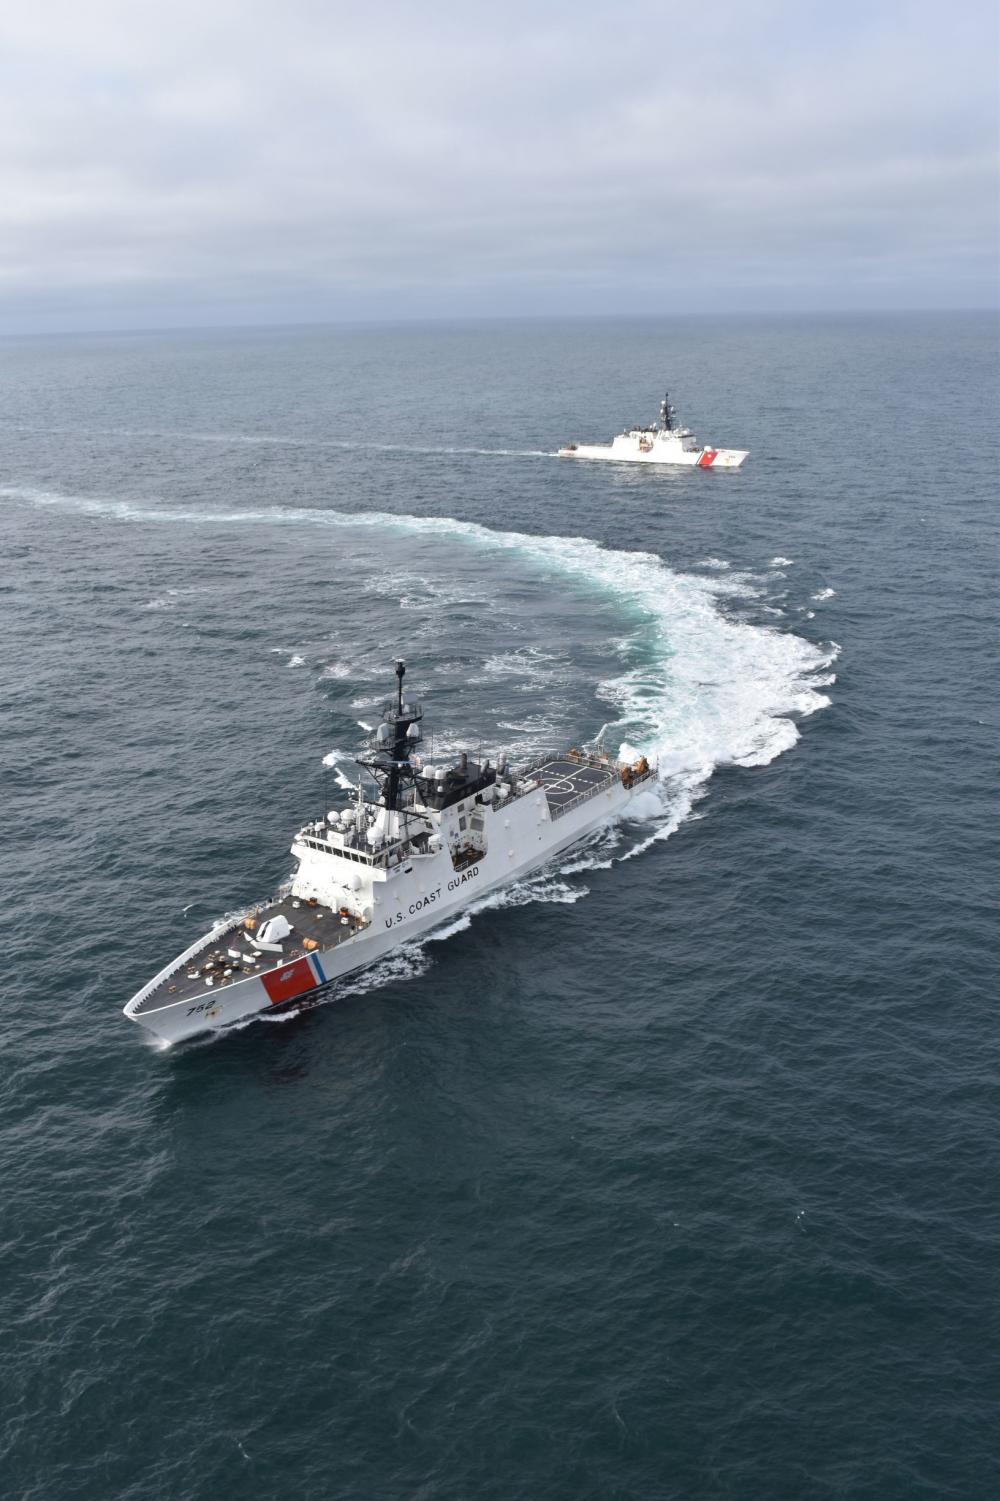 Coast Guard cutter returns home following 97-day multi-mission Arctic deployment